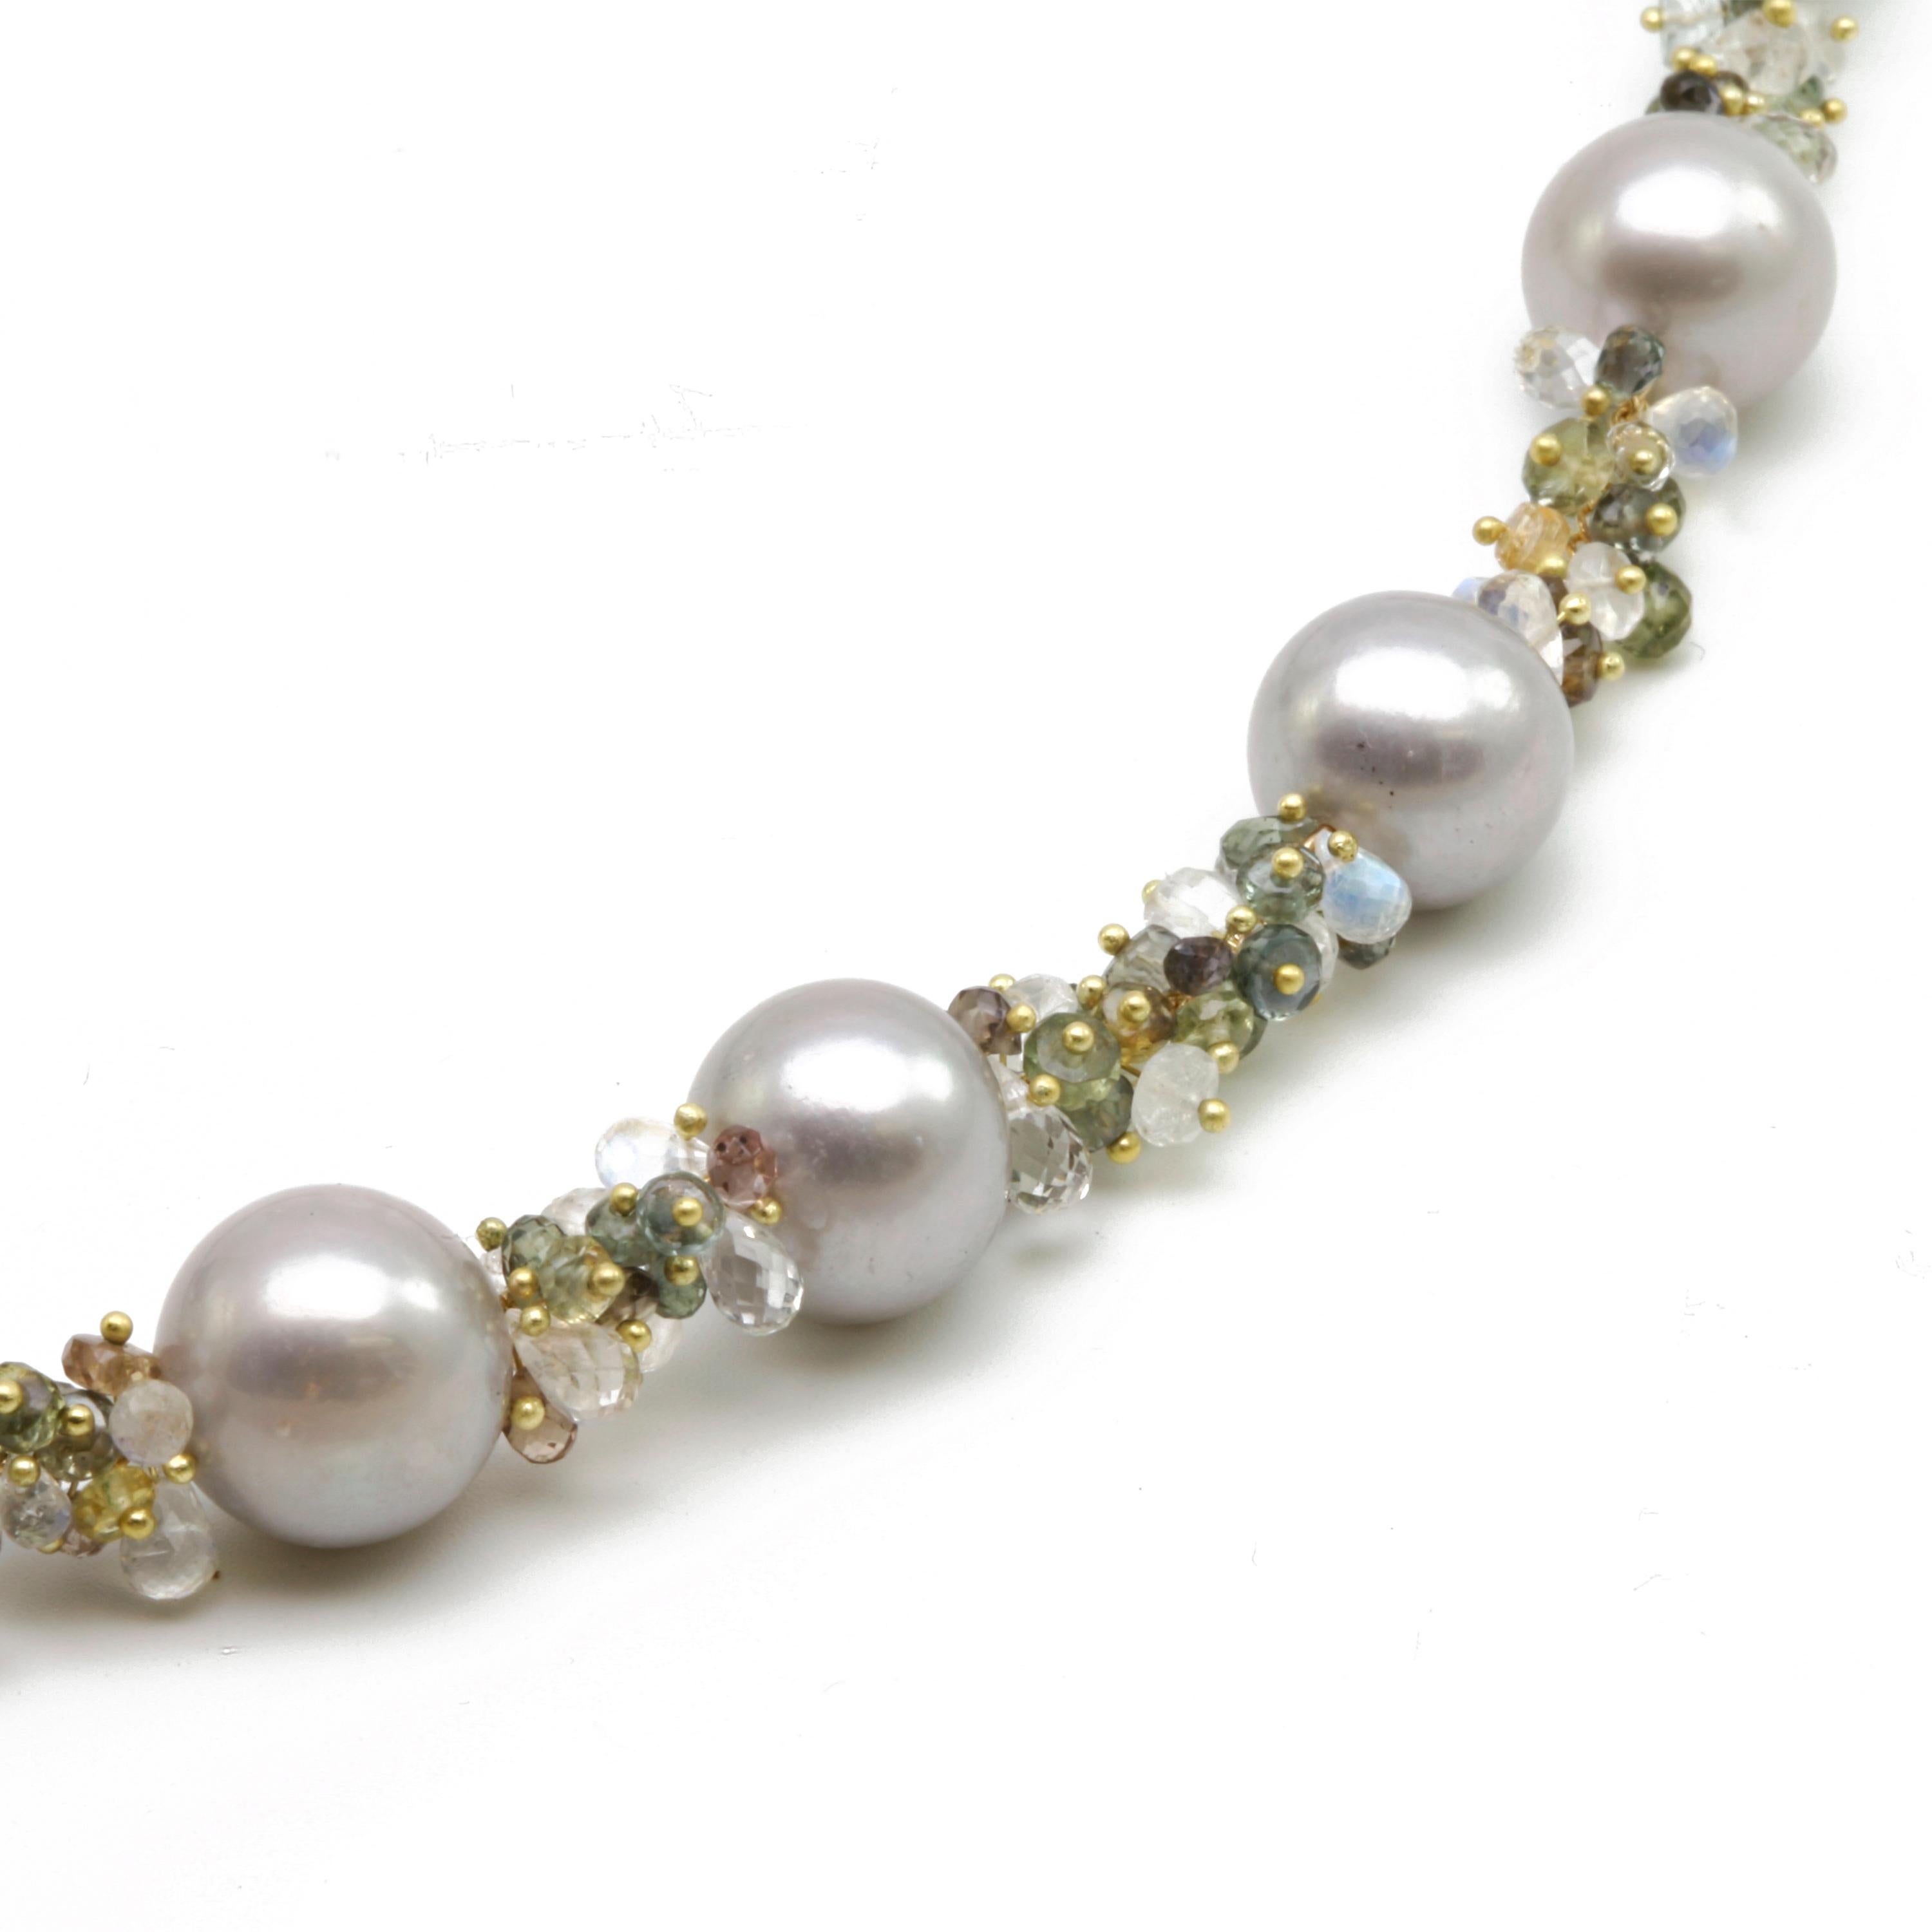    I made this piece with Large Grey Fresh Water Pearls that are placed between clusters of tiny 18k gold finials, Grey Sapphire, Color Change Garnet, micro-faceted Green Amethyst, Citrine, White Topaz, and Moonstone.  It has a signature clasp and a